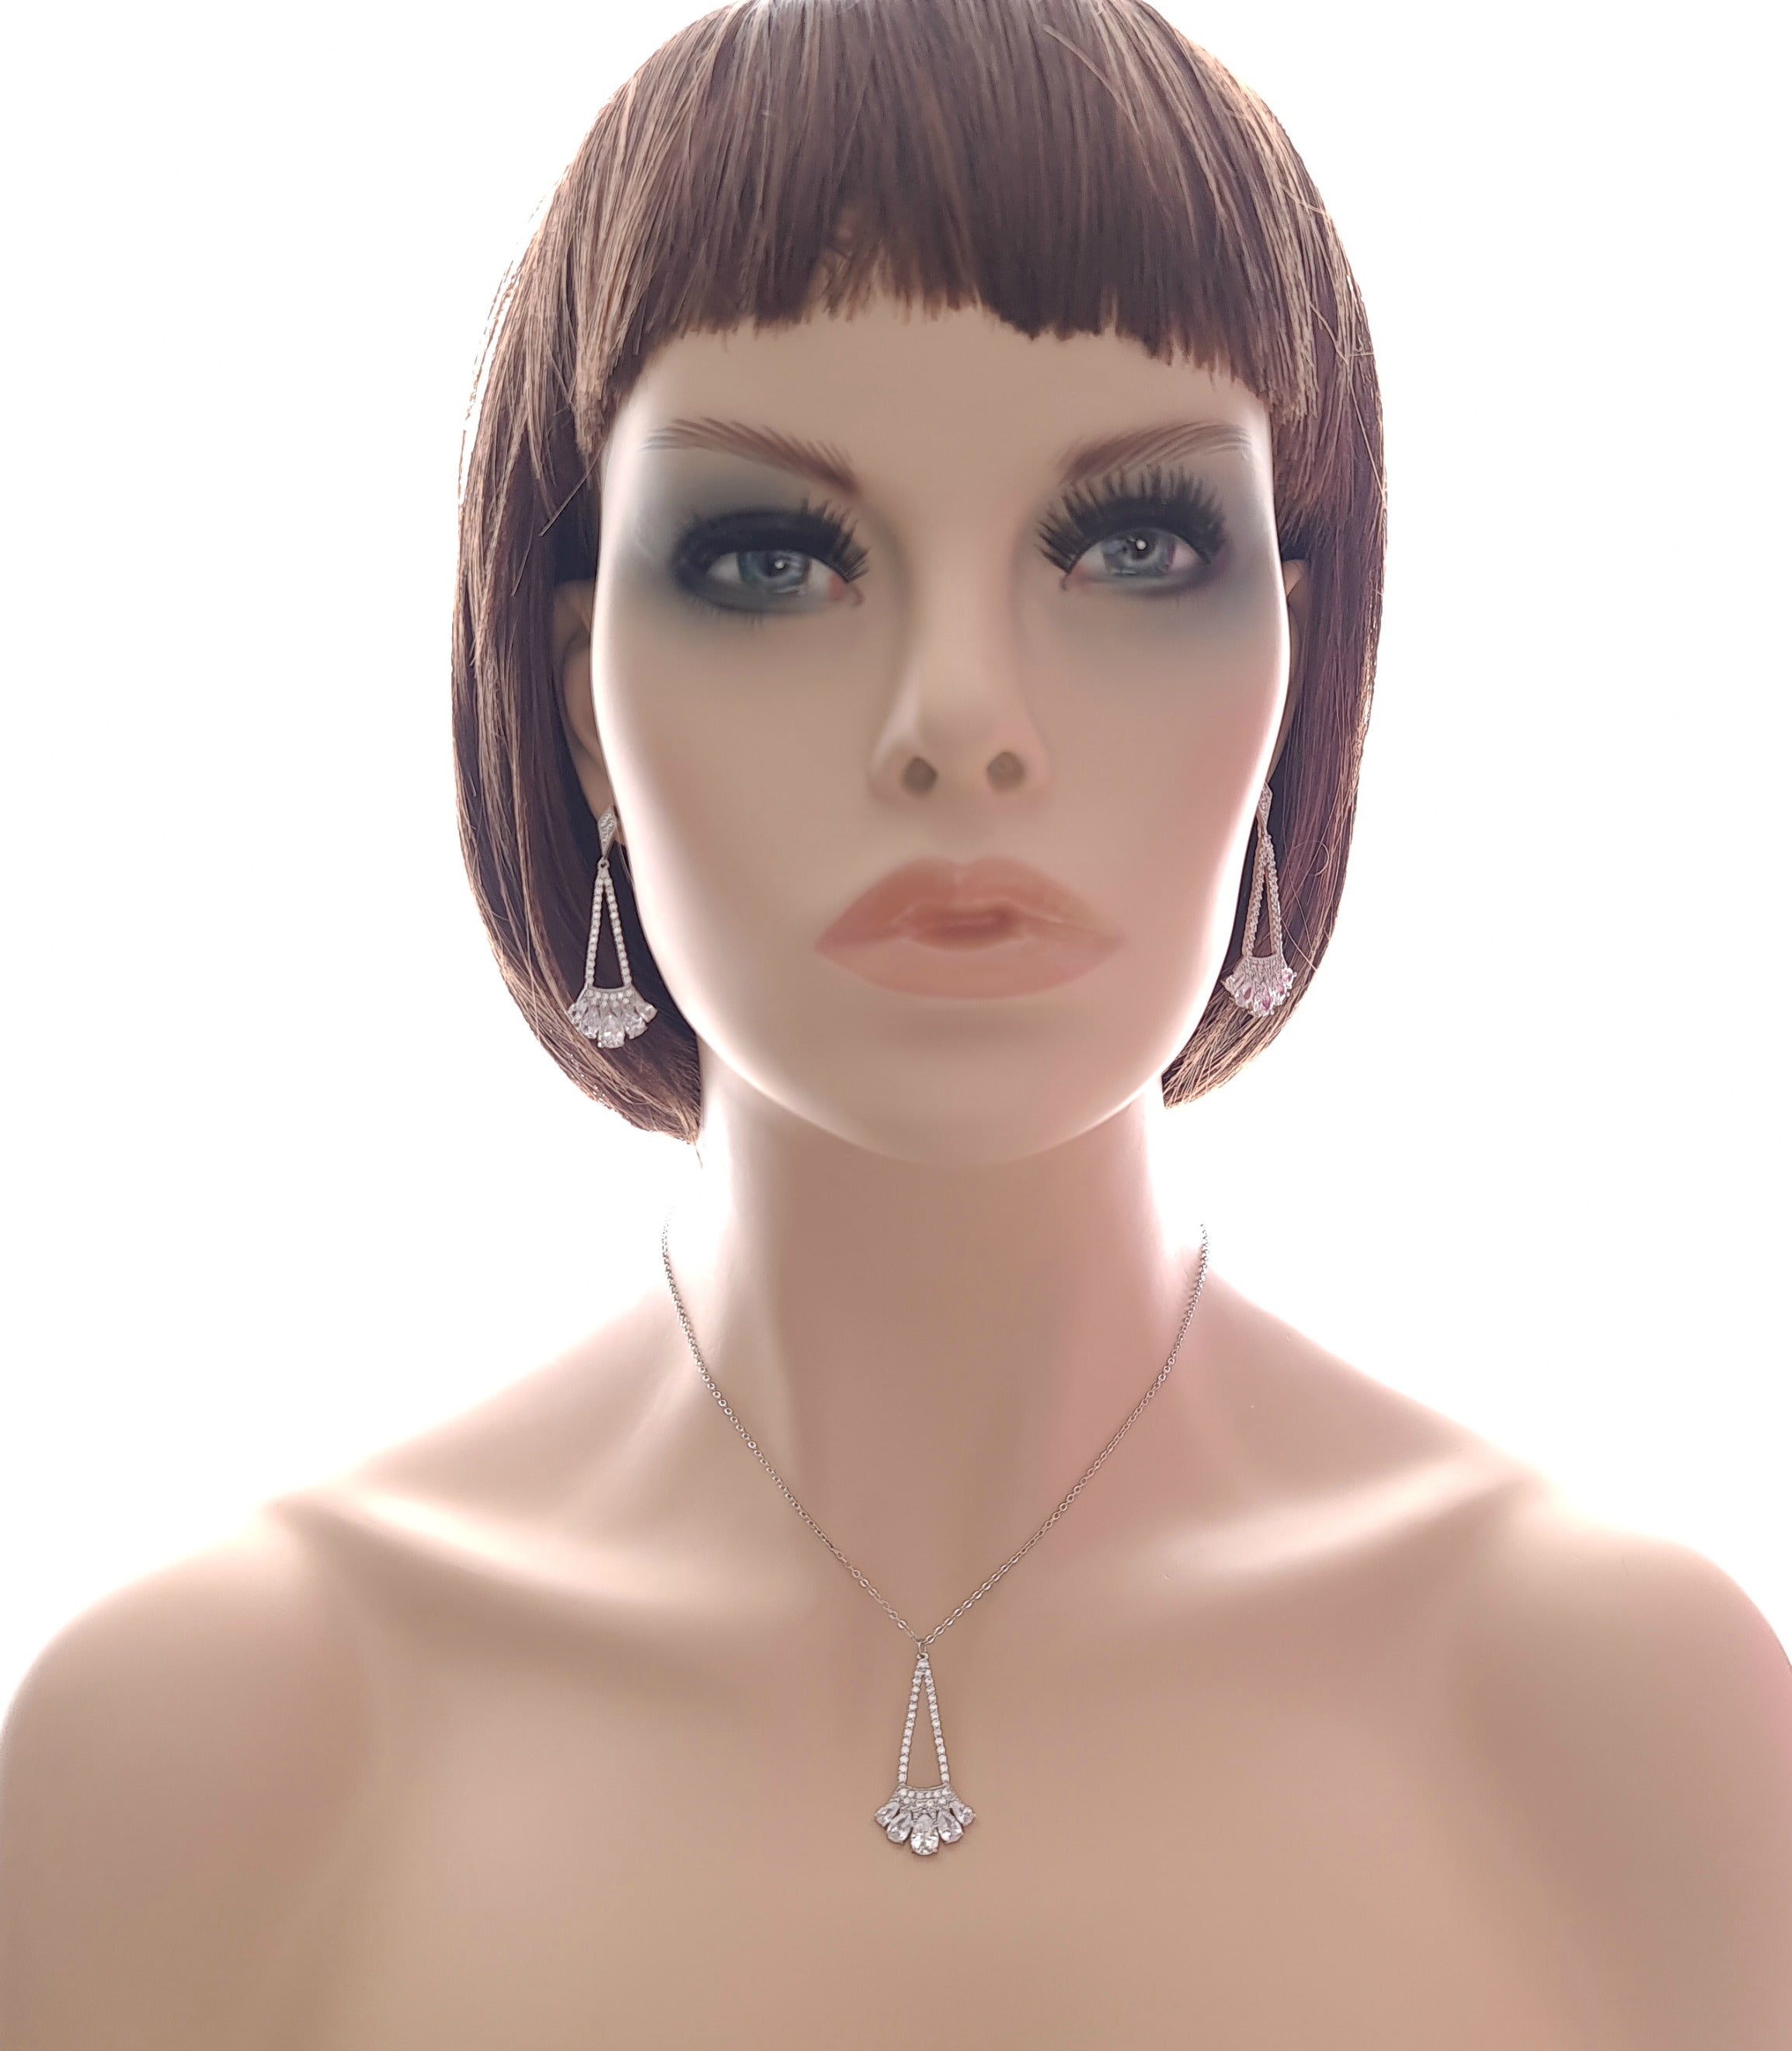 Pendant and Earrings Set in Rose Gold -Sydney